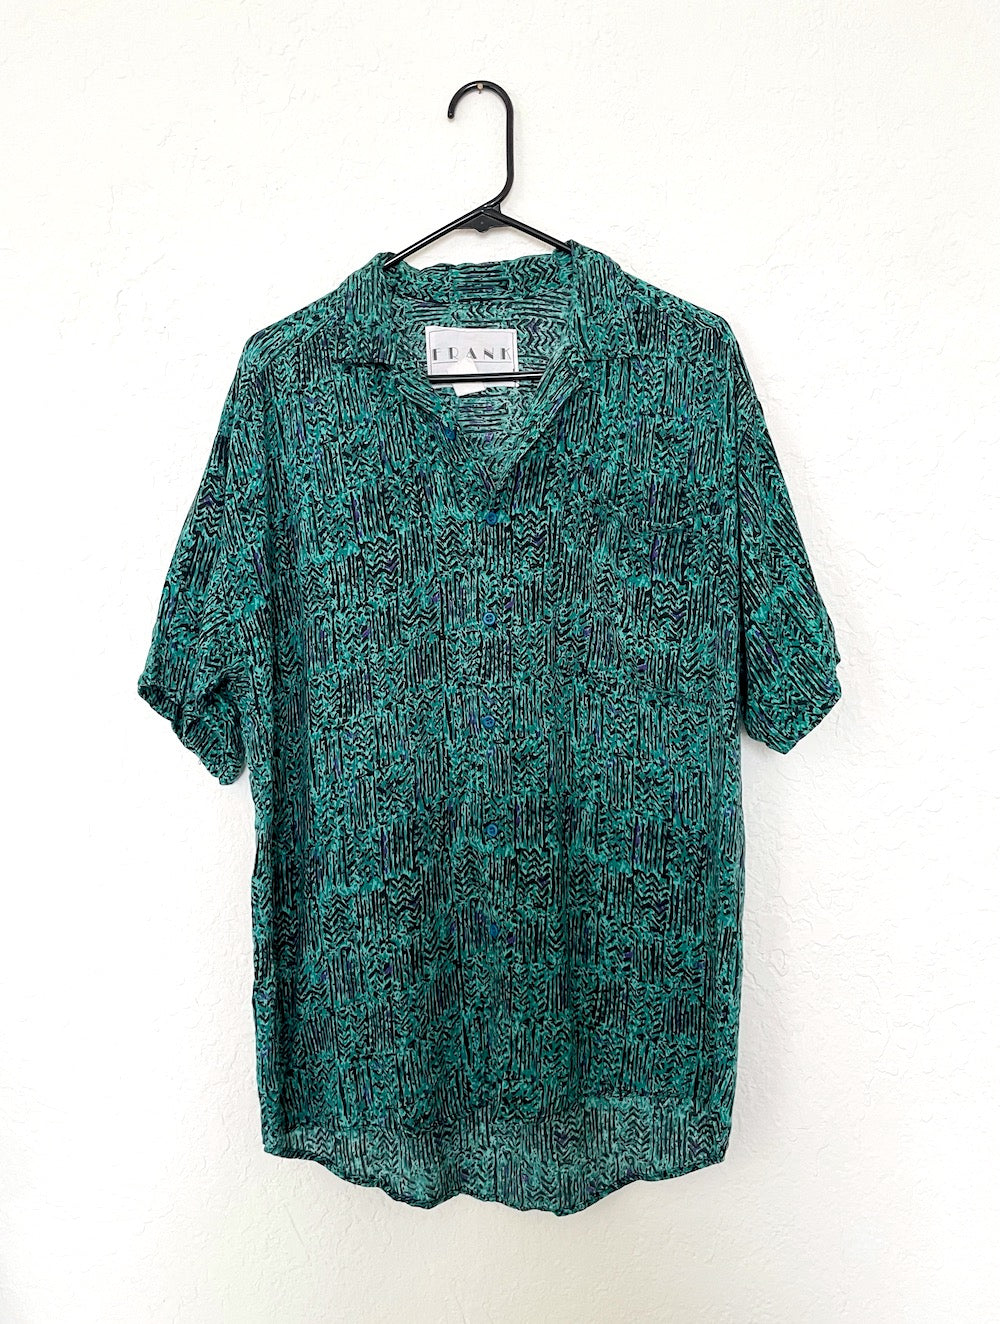 Vintage 90s Blue and Green Printed Button Down Top